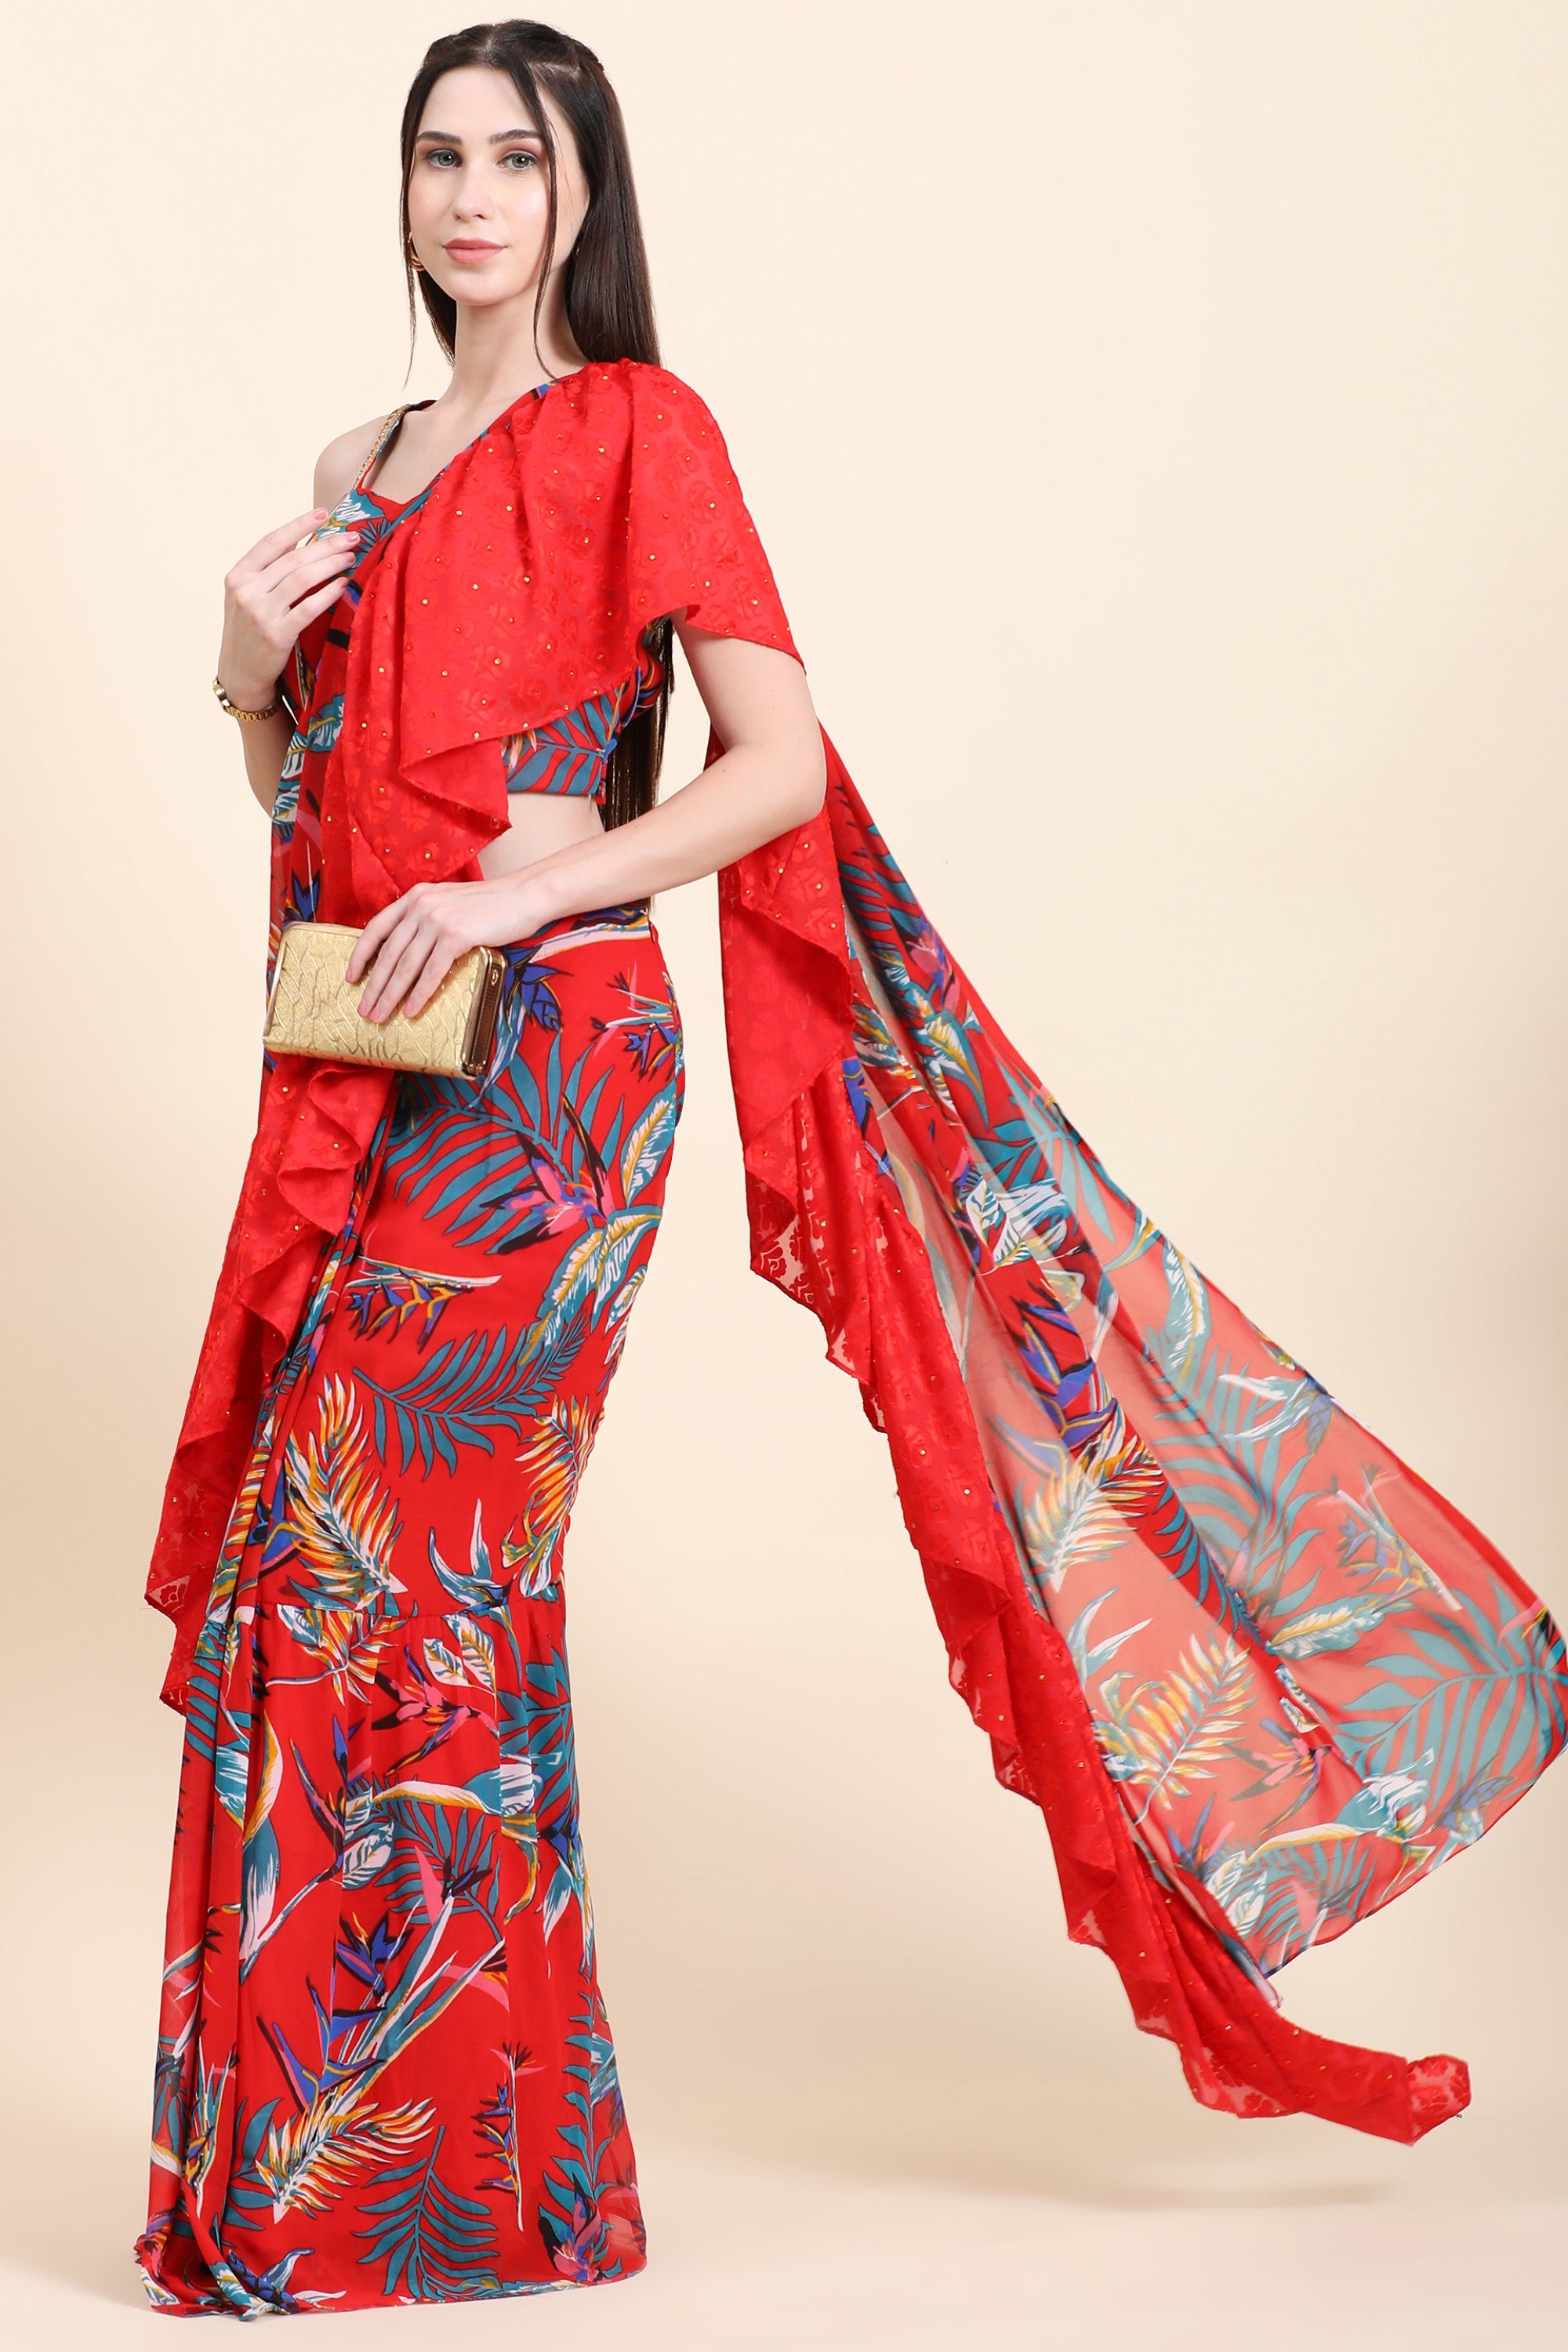 Women's Red base Leaf print Georgette Ruffle Saree, Blouse set - MIRACOLOS by Ruchi